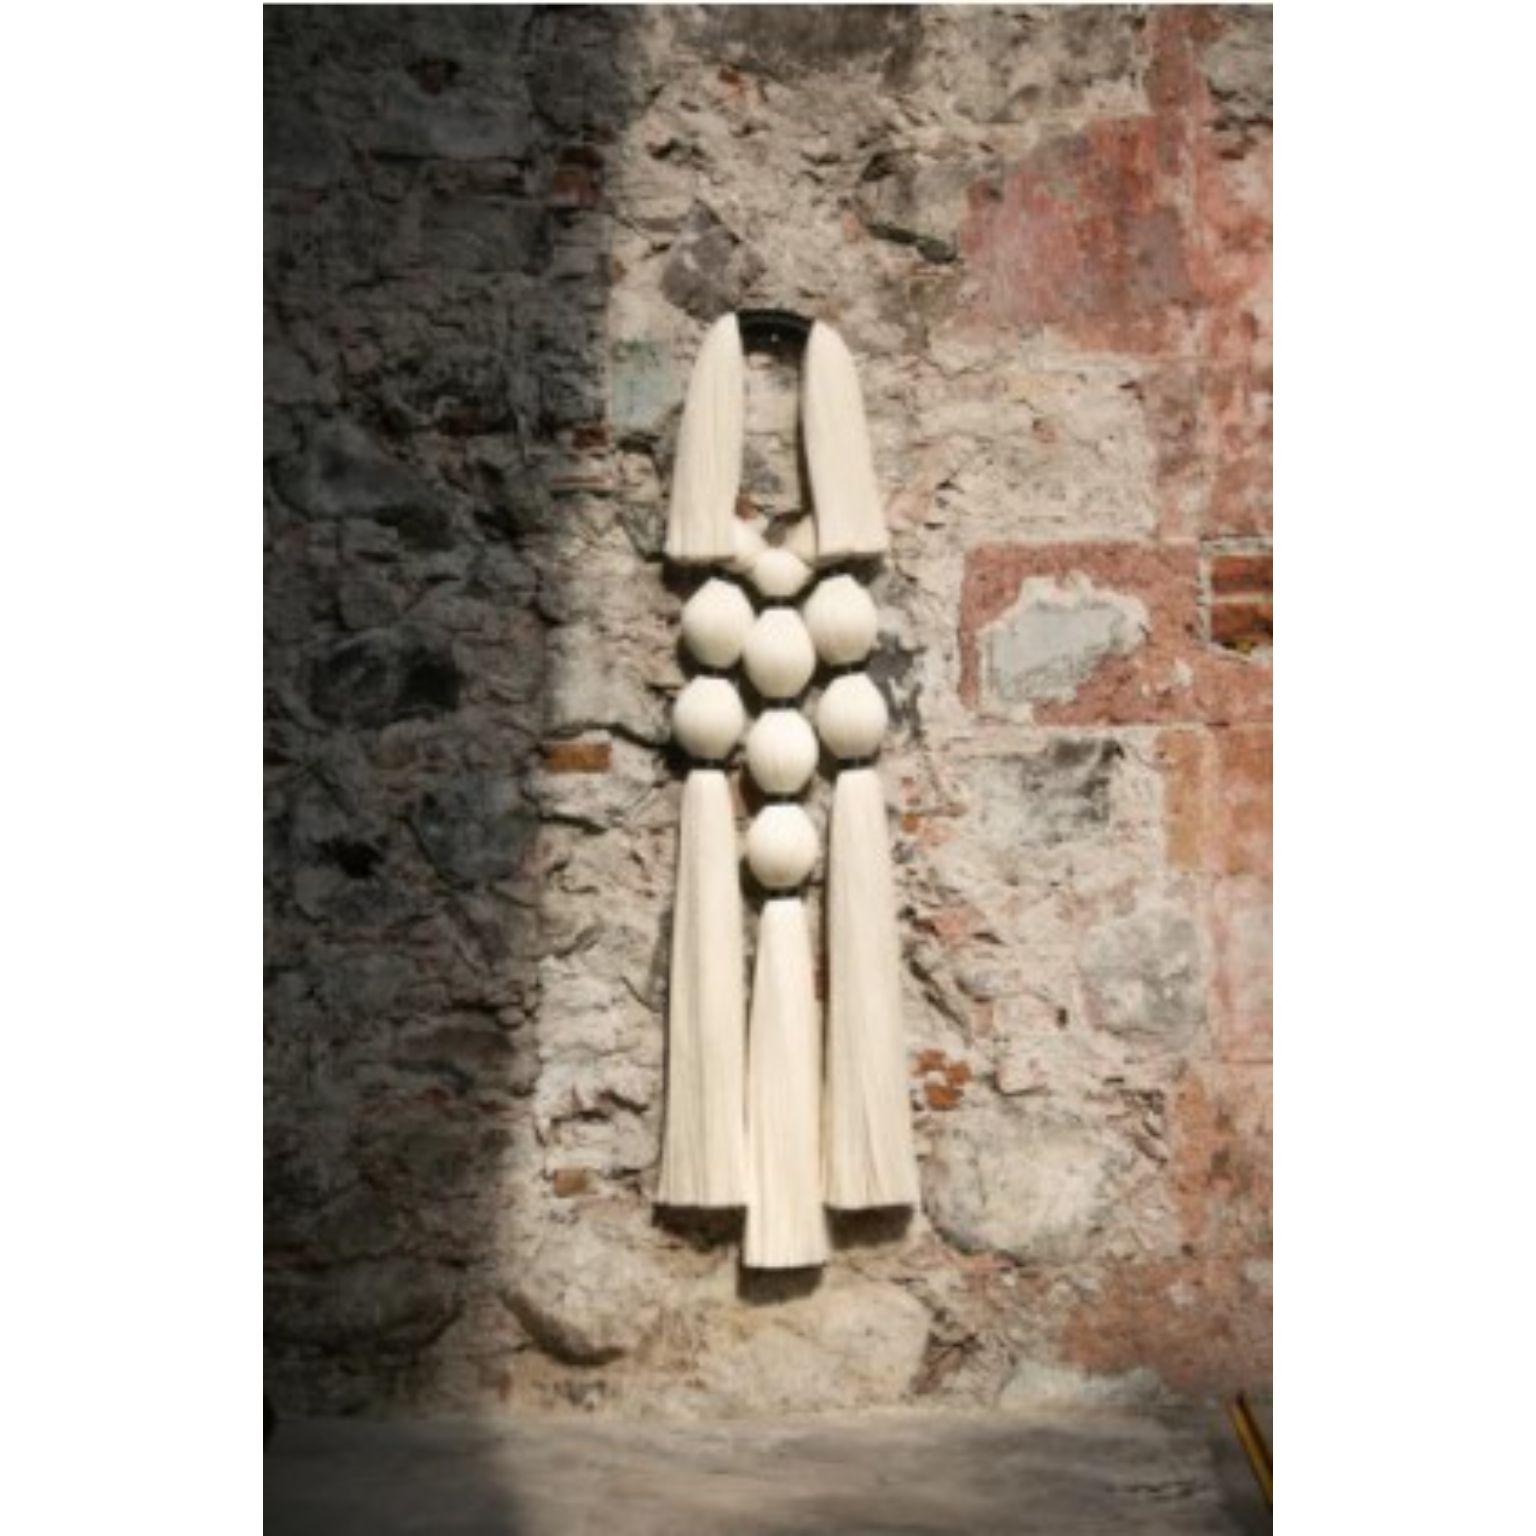 Siete Brujas back wall decoration by Caralarga
Dimensions: D 37 x W 10 x H 160 cm
Materials: 100% raw cotton thread, waxed cord, paper maché spheres.
Handmade

Caralarga is a textile design and production workshop inspired by nature’s raw